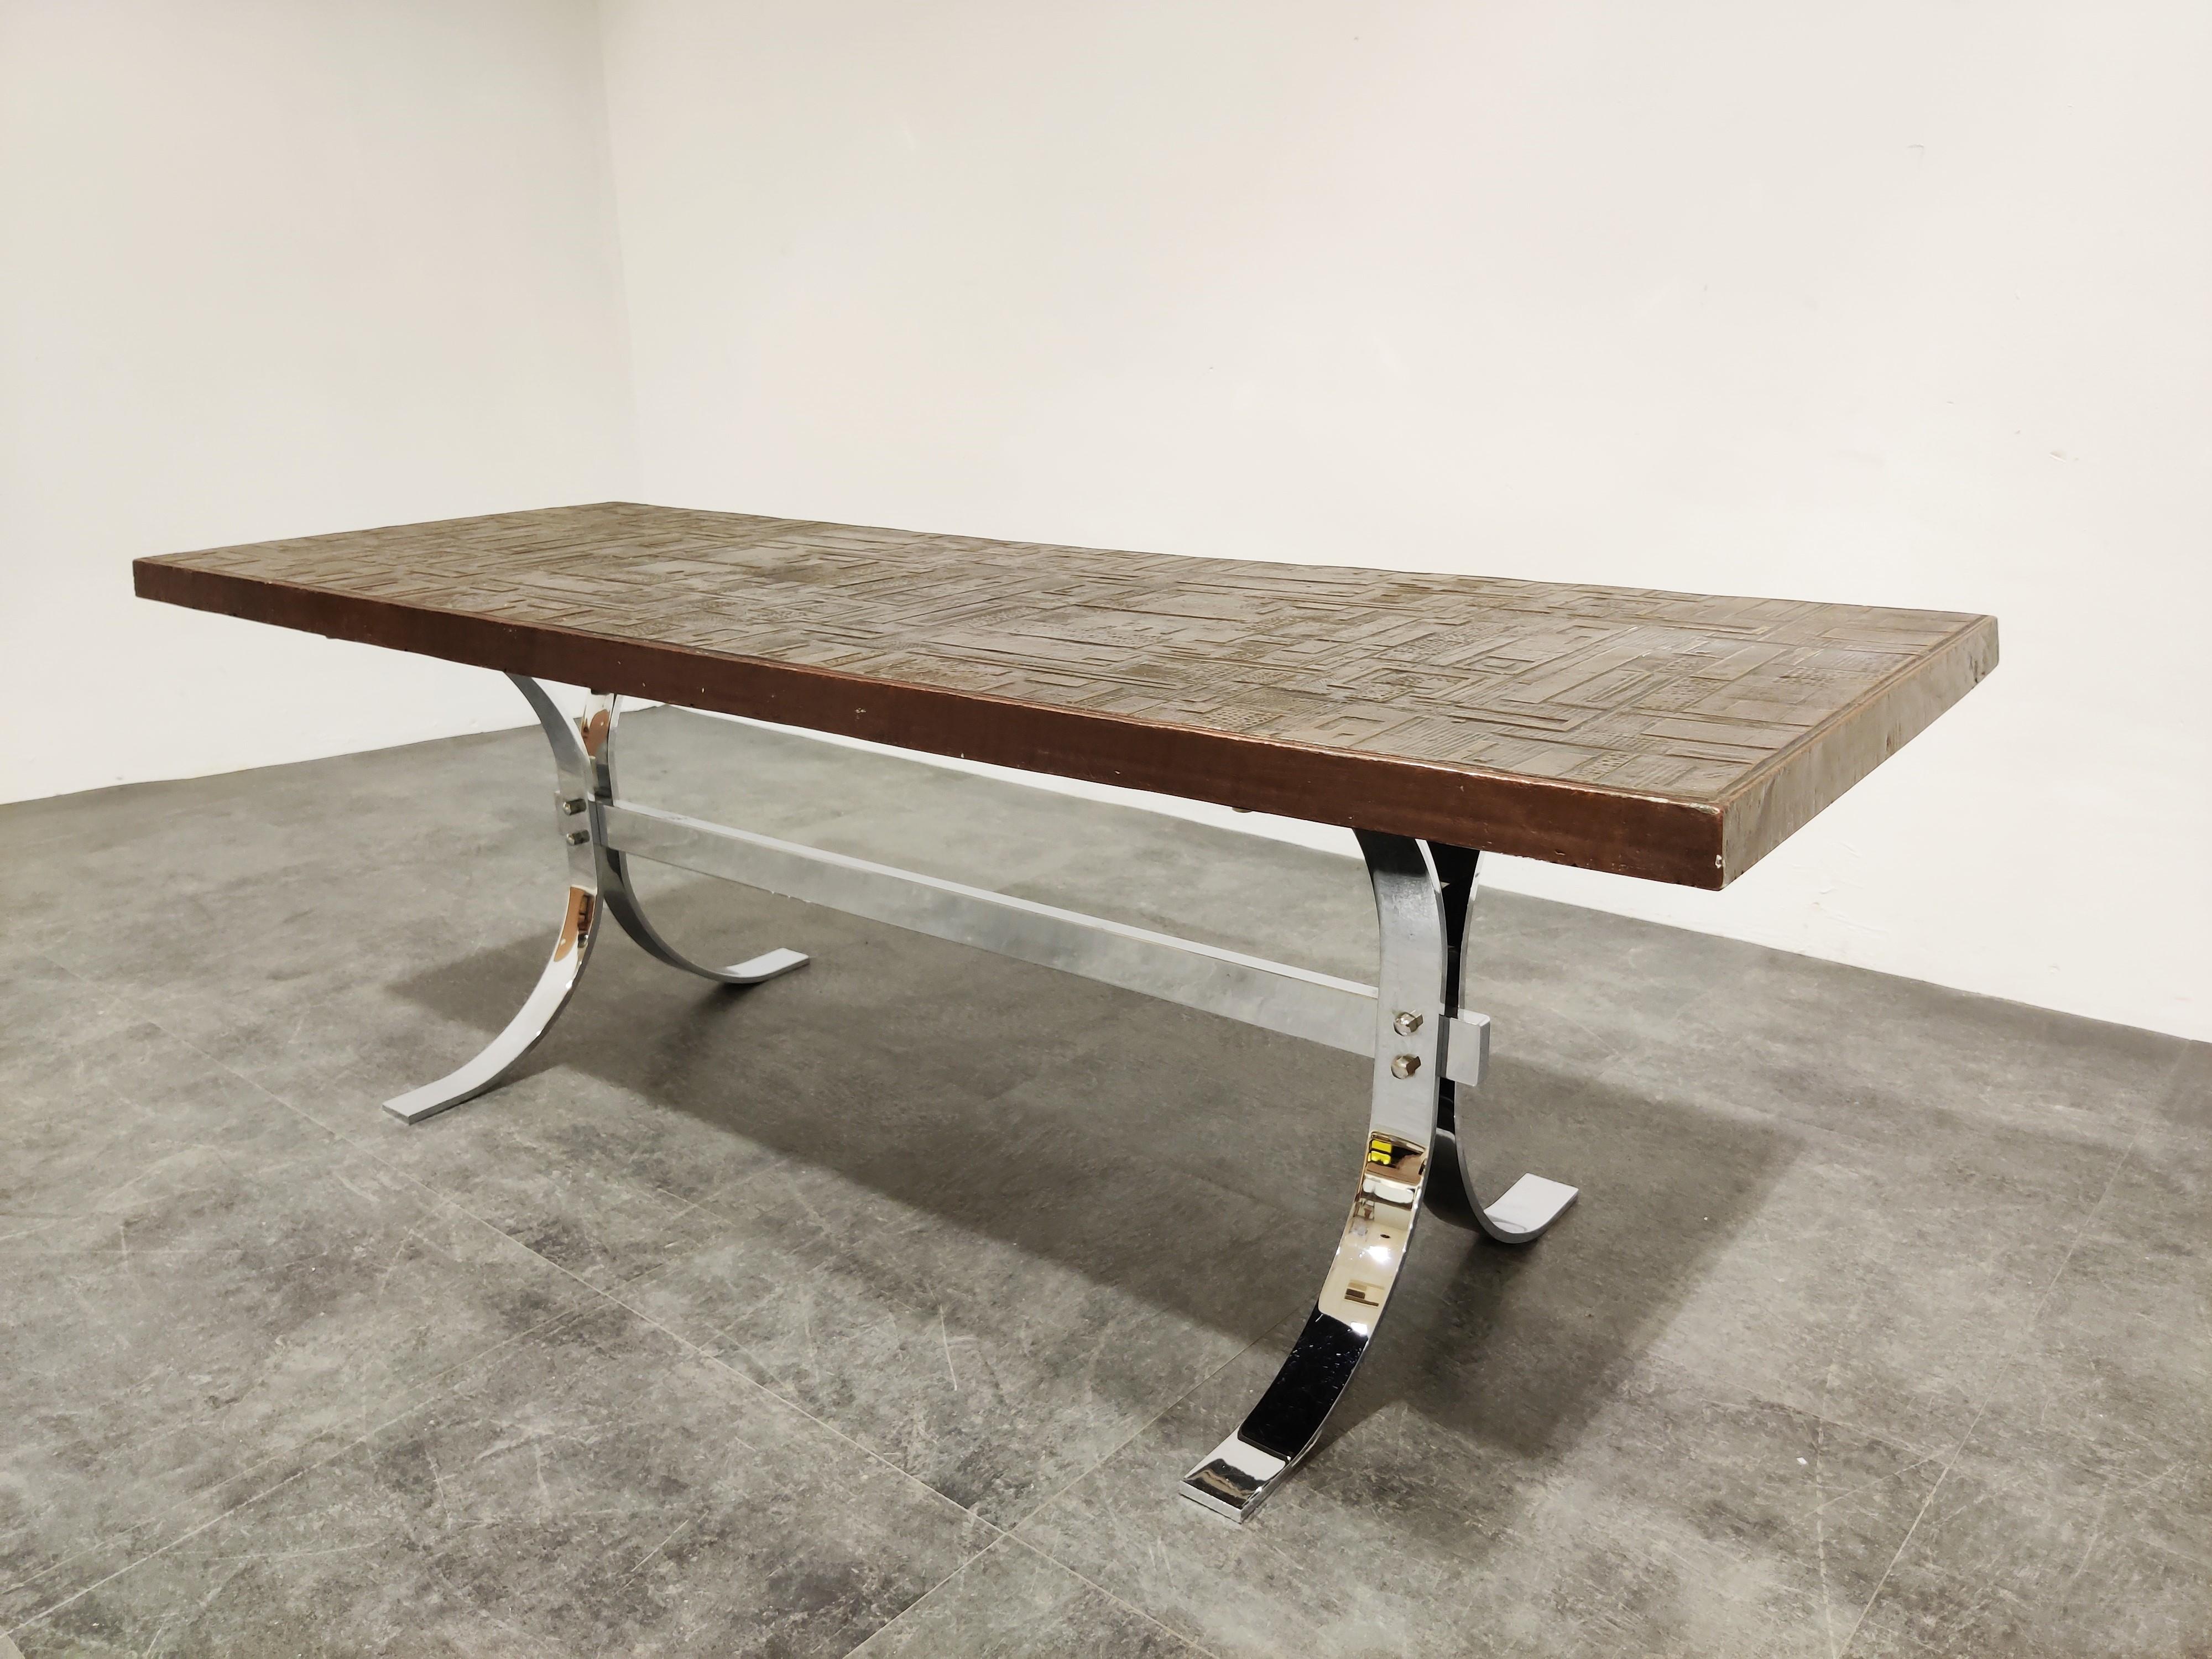 Midcentury chrome coffee table with a Brutalist design copper-plated table top. 

Timeless design and good color which mixes well with most interiors.

Good condition, minor stains on the top, visible depending on the light,

1970s,